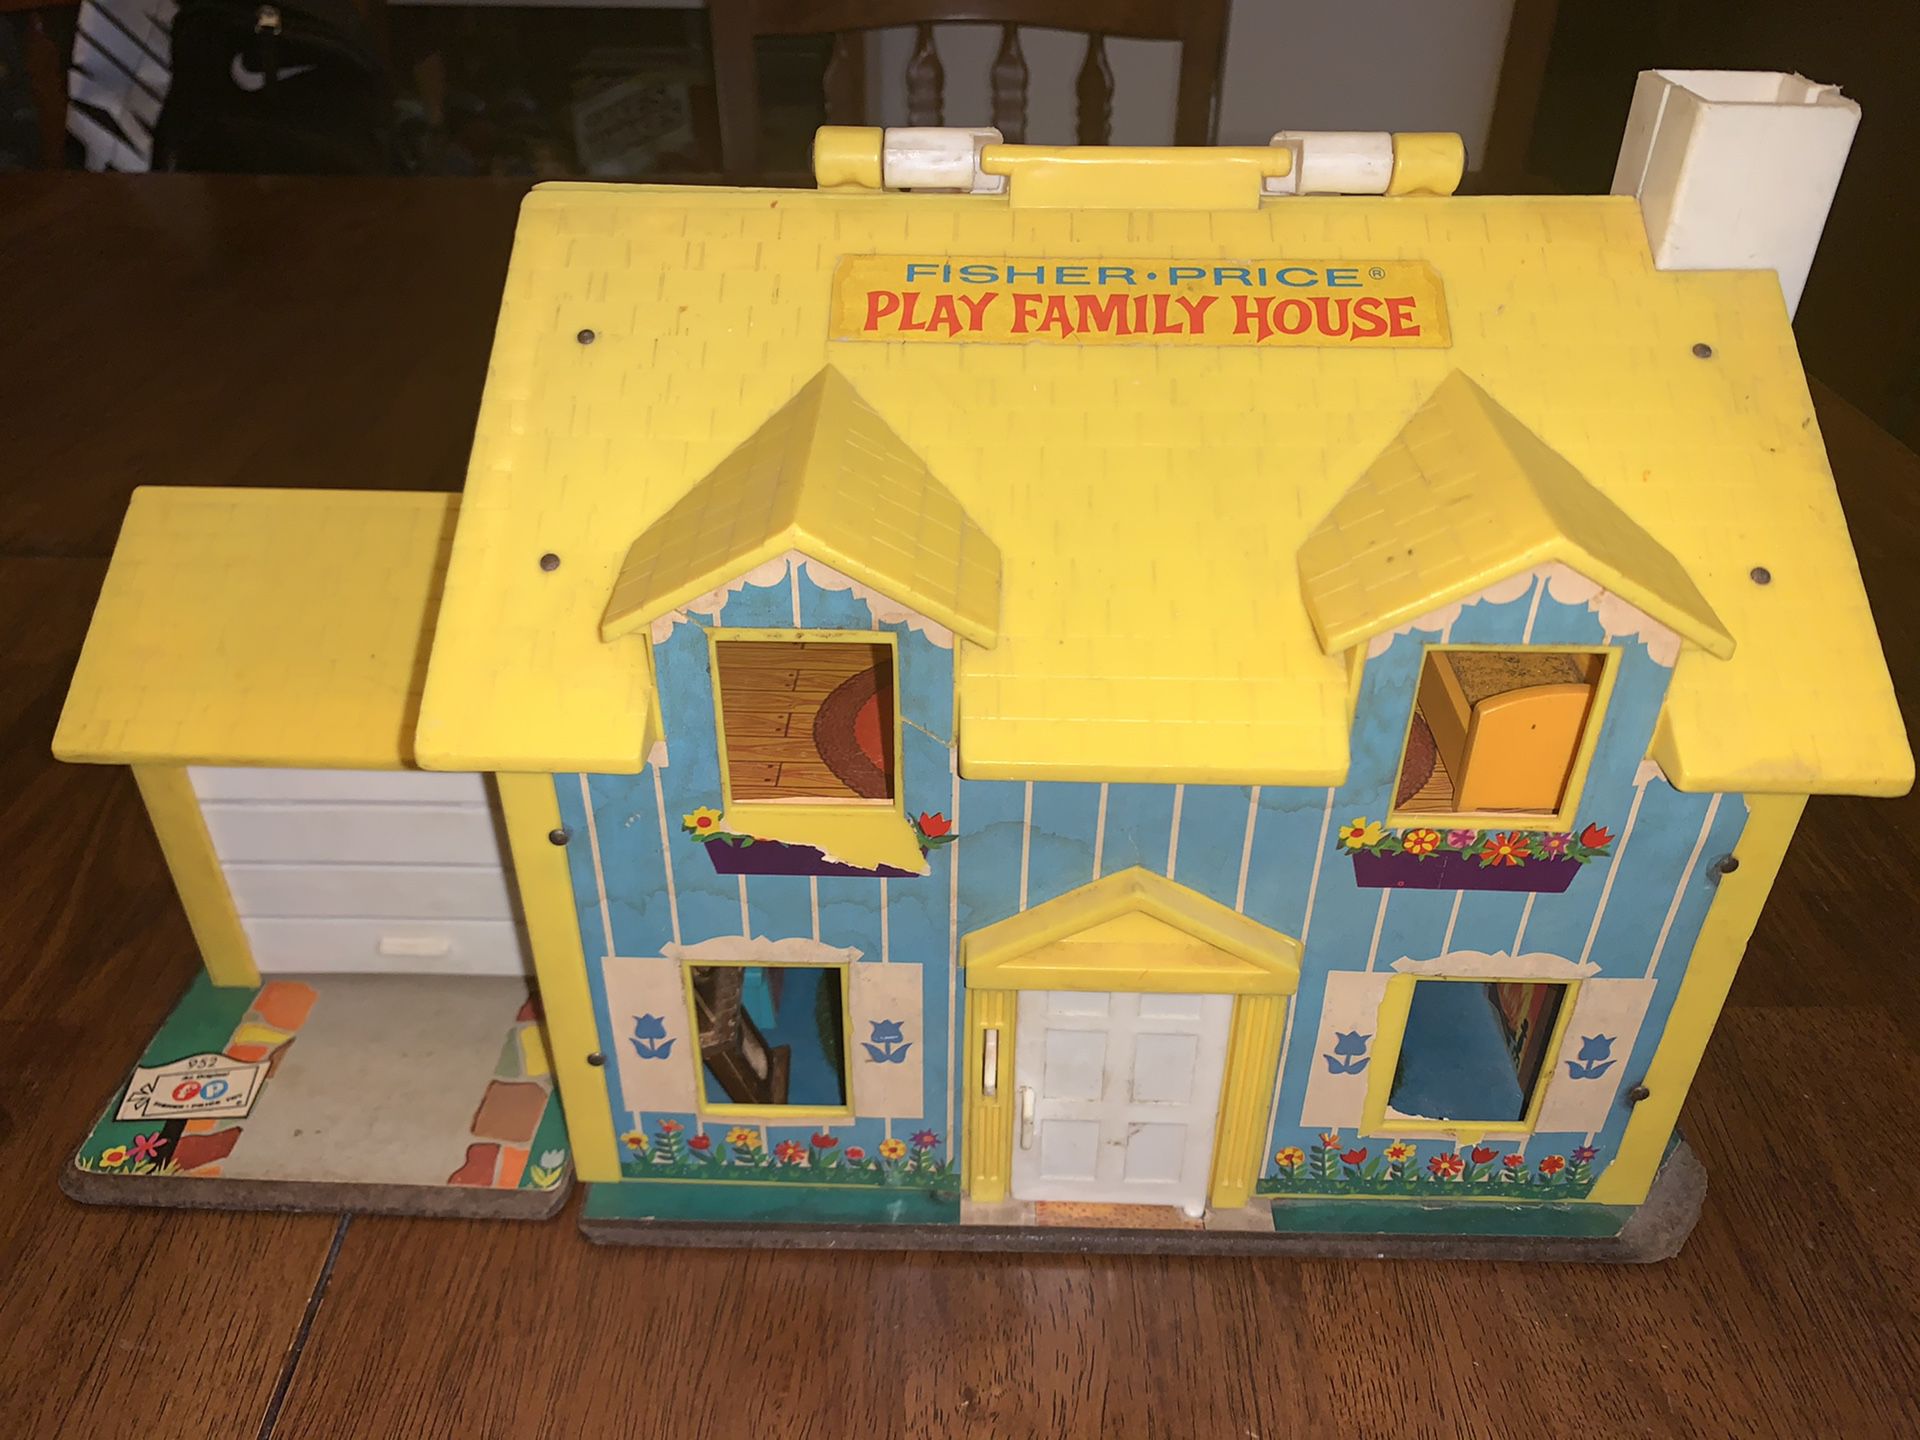 1969 Vintage Fisher Price Family Playhouse toy